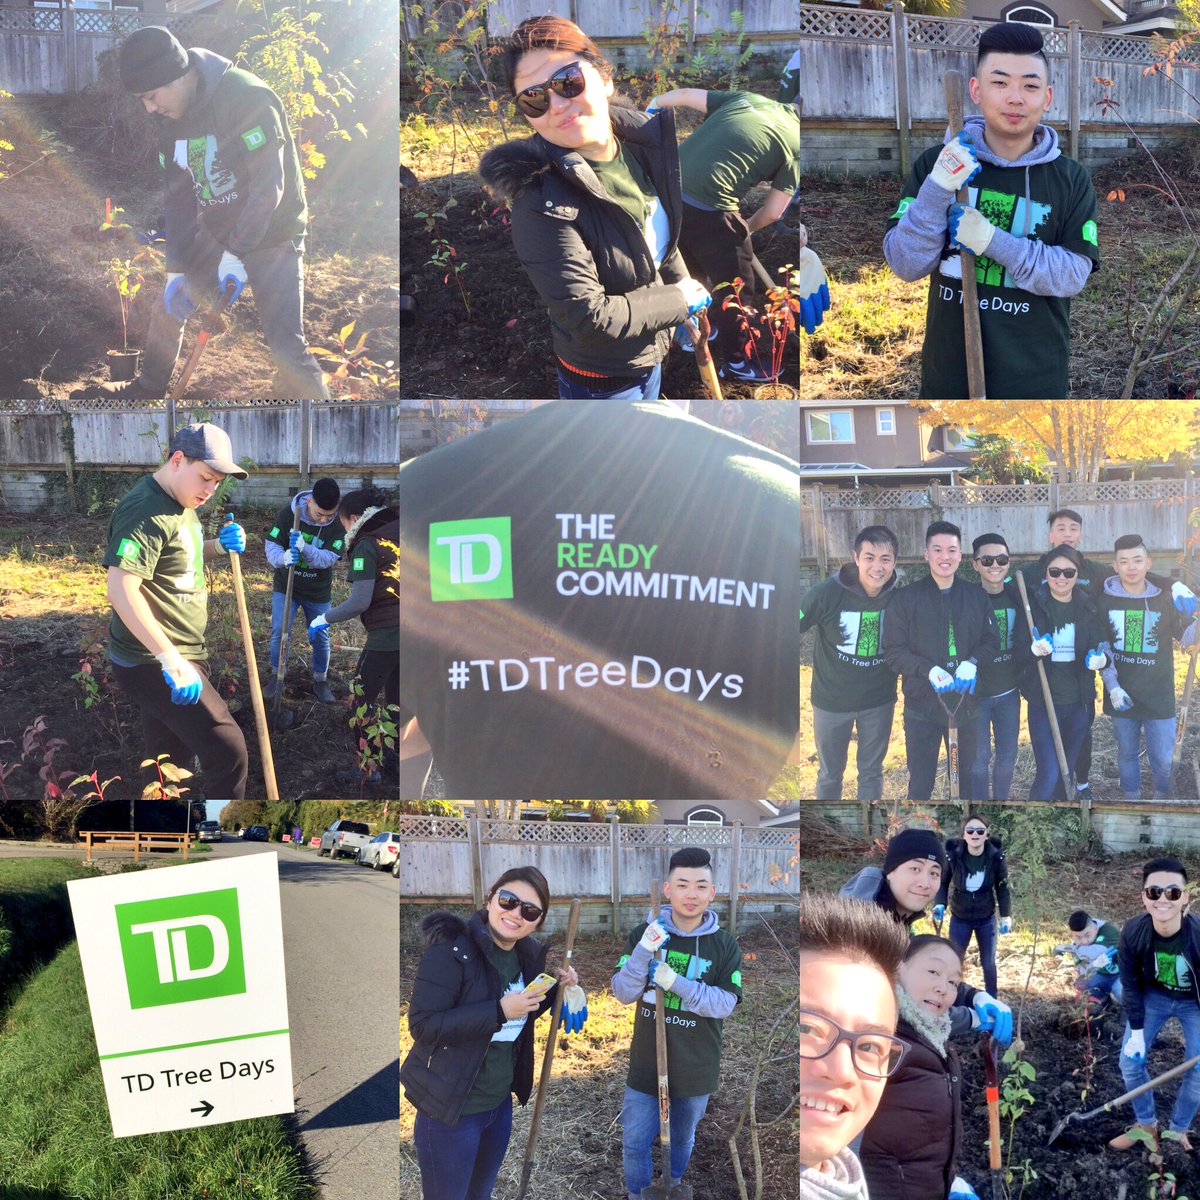 TD 0152 #RichmondMain helped to green @Richmond_BC with over 1,100 trees and shrubs. Thank you for organizing, @Tricia_Whitwham @Denise_w_luk @kristyanneleong! 🌳🌱

cc: @MauroManzi_TD @NicoleKubica_TD @johnstonzin @TDFEF

#PACGivesBack #TDTreeDays #TheReadyCommitment